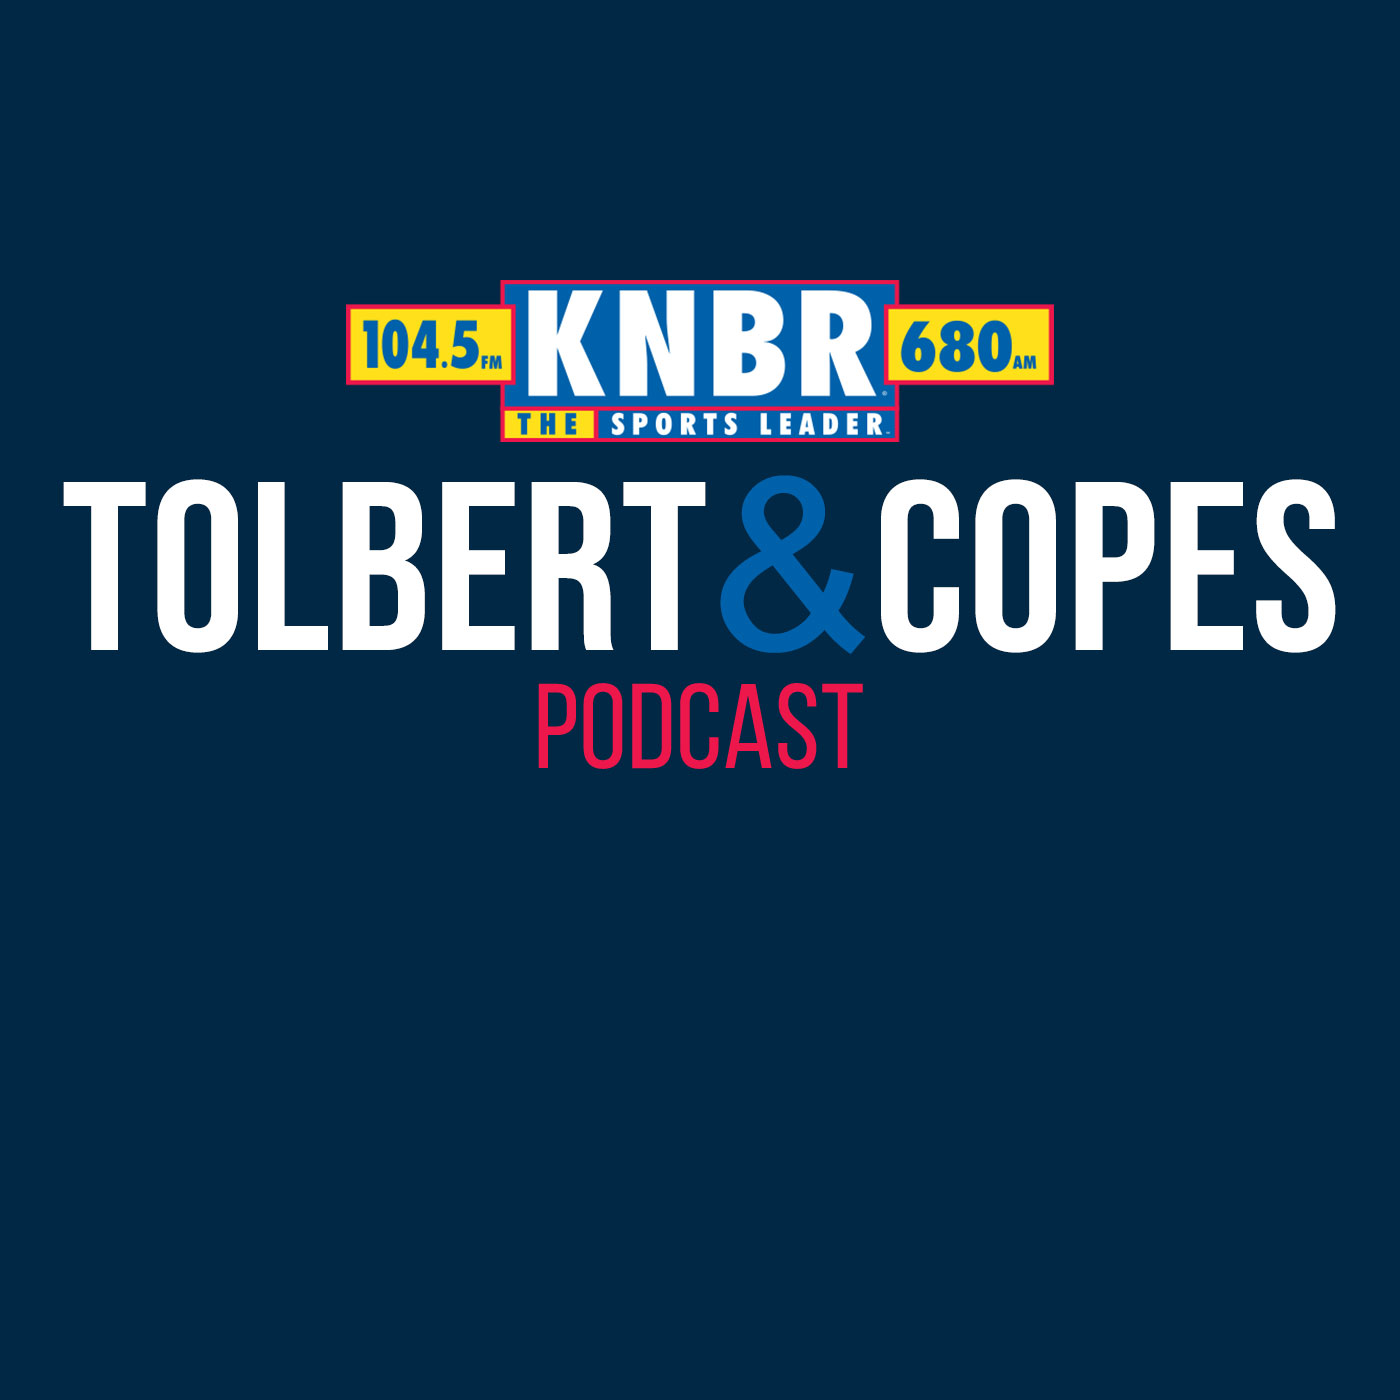 4-11 Jeremy Affeldt joins Tolbert & Copes to discuss the Giants struggles against the Dodgers & Jeremy's relationship with George Brett